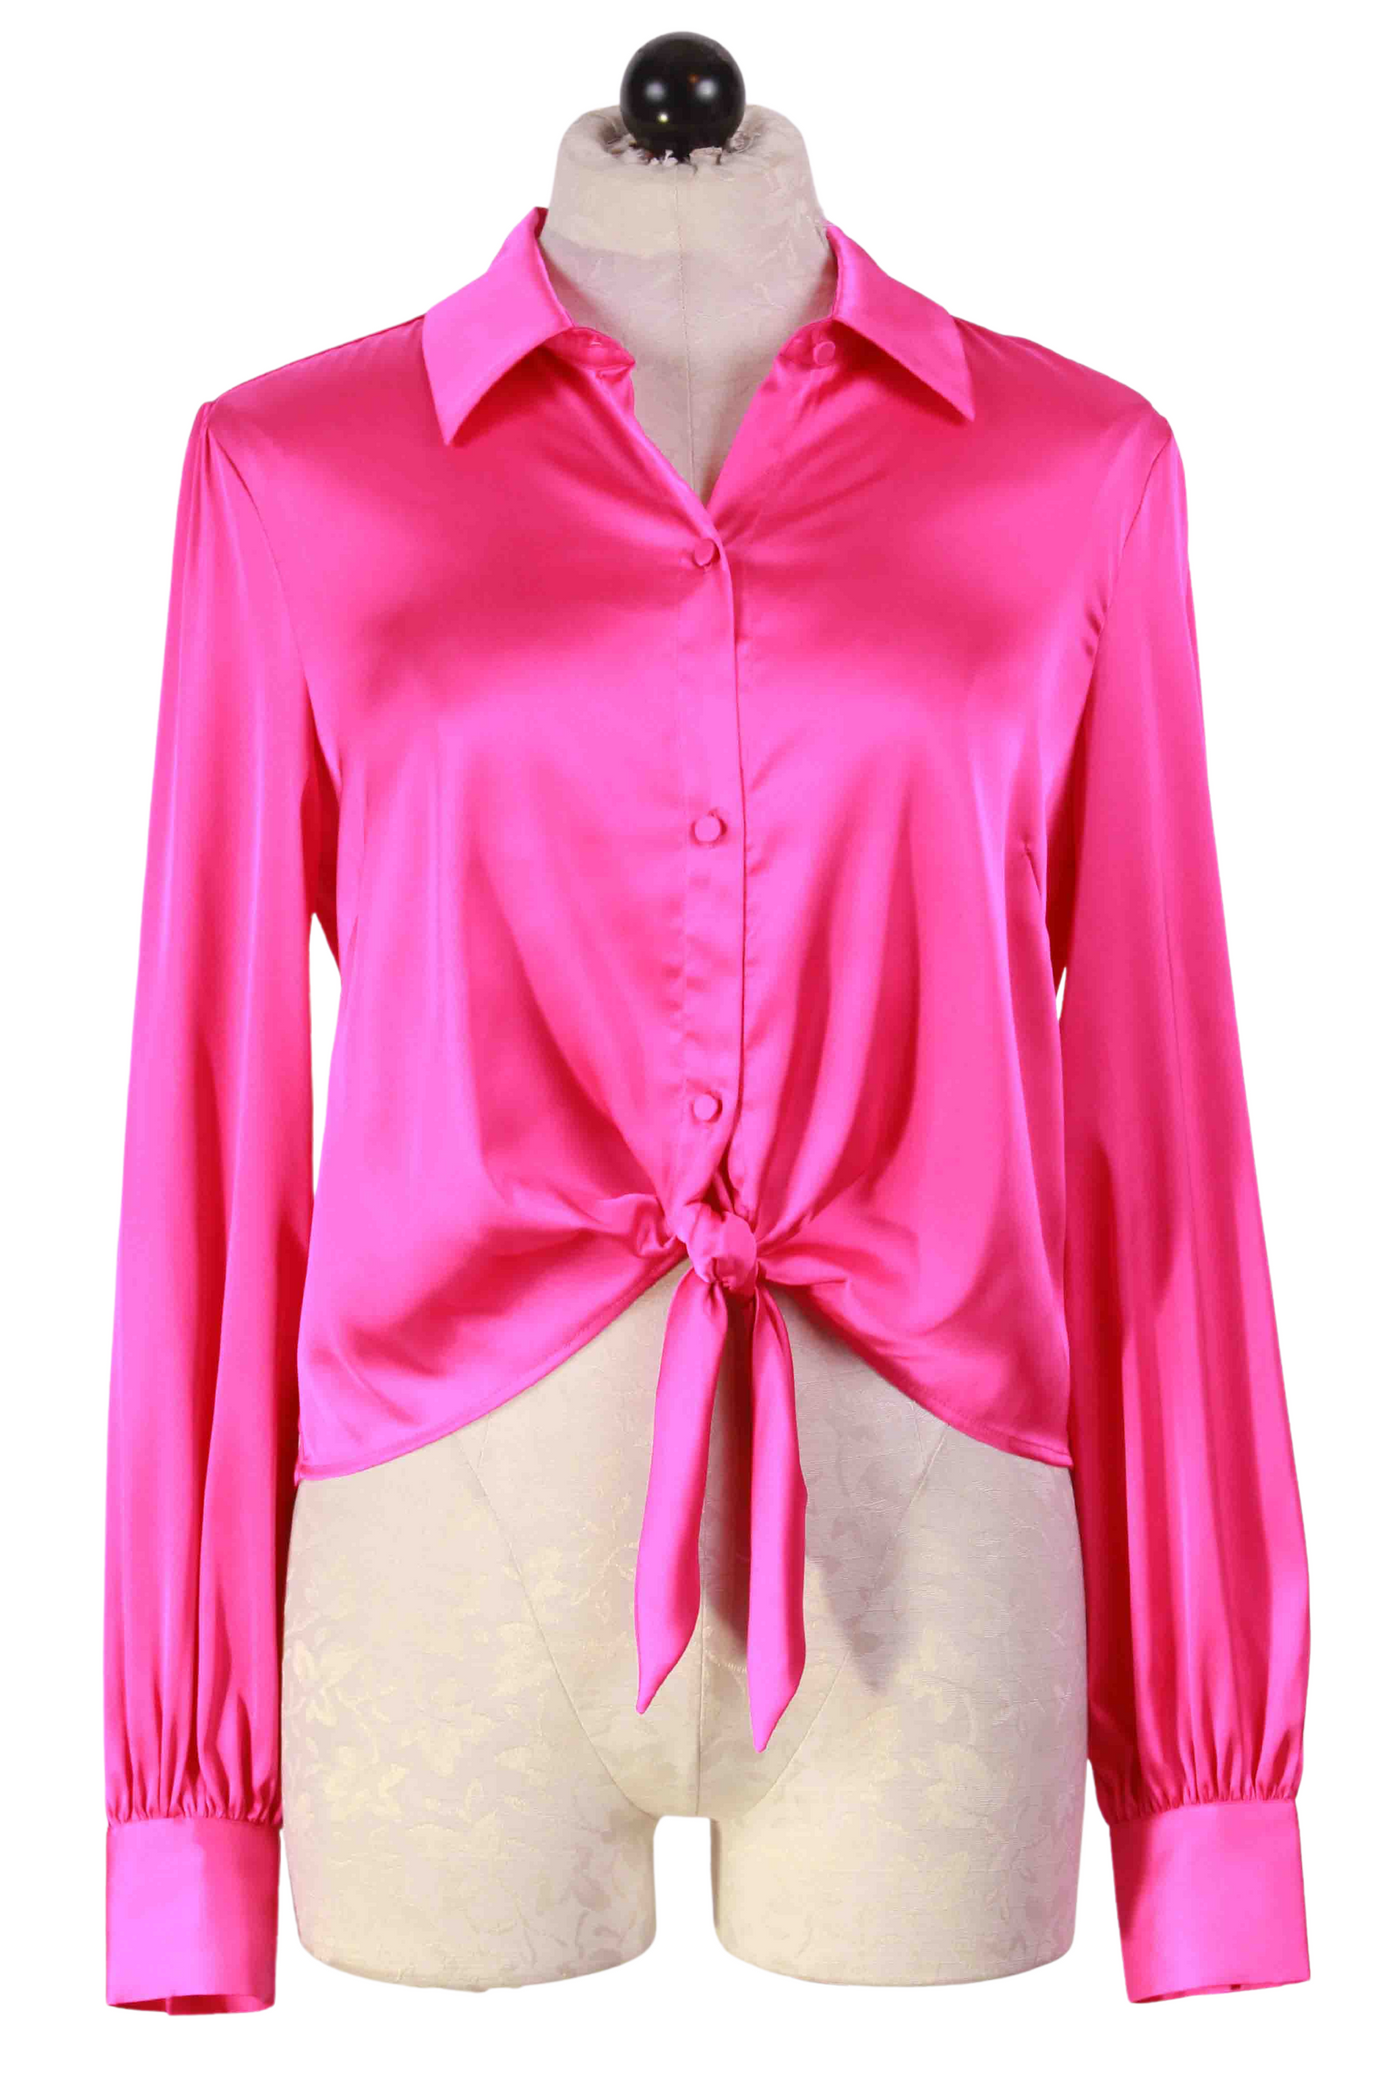 Hot Pink Emory Tie Front Blouse by Generation Love